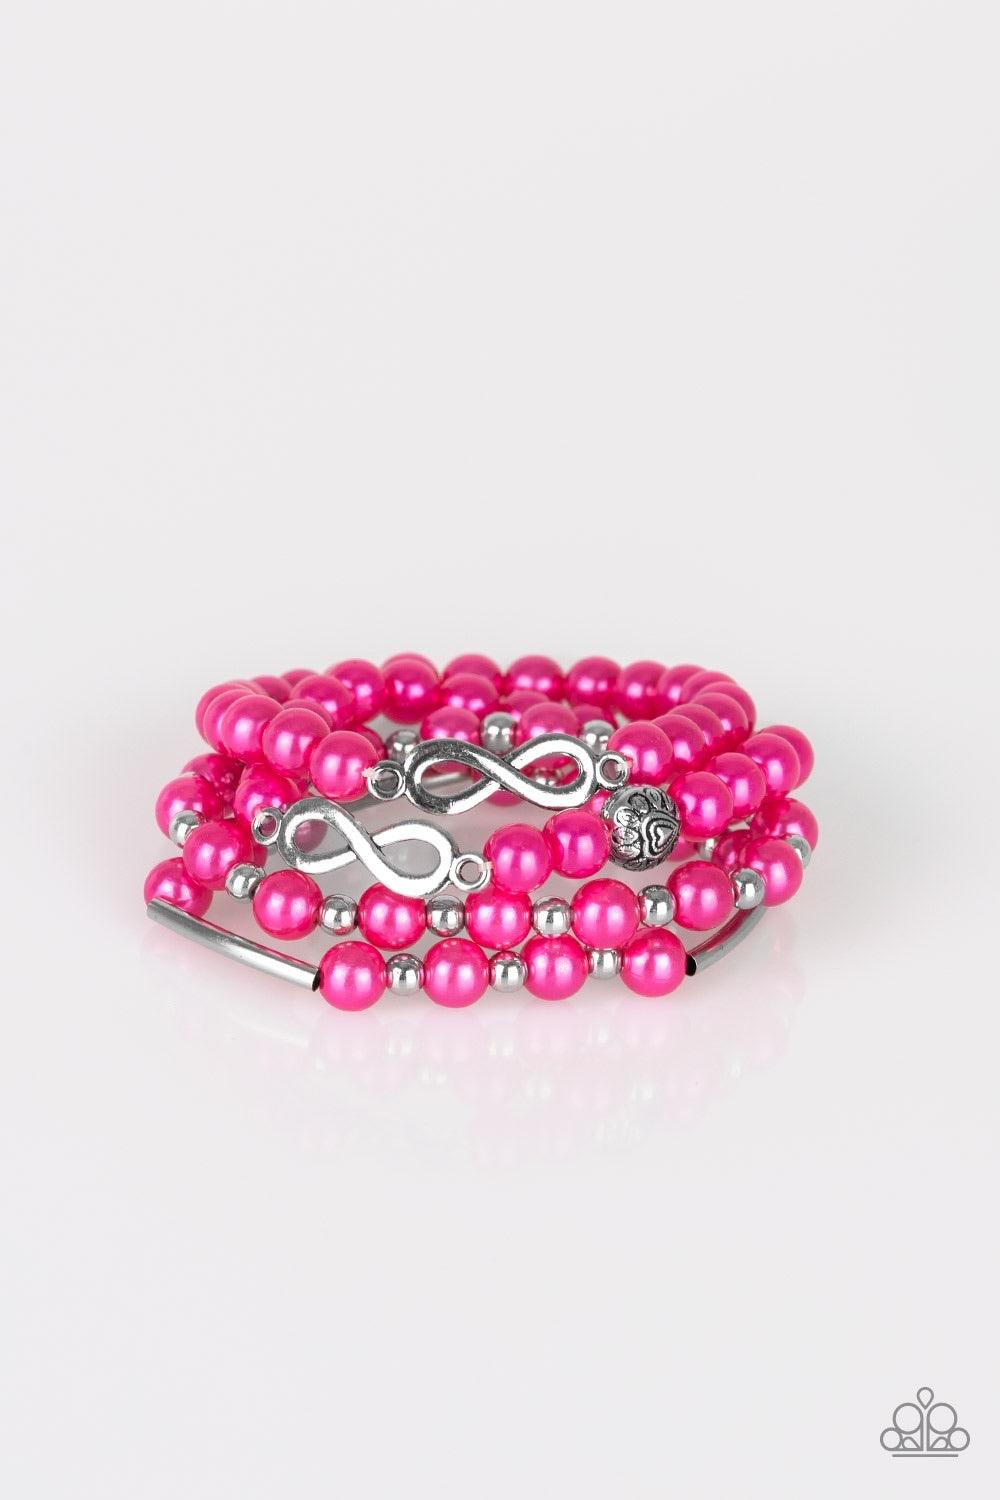 Paparazzi Accessories Limitless Luxury - Pink Infused with an array of silver accents, a collection of pink pearls and silver infinity charms are threaded along stretchy bands around the wrist for a glamorous look. Sold as one set of three bracelets. Jewe